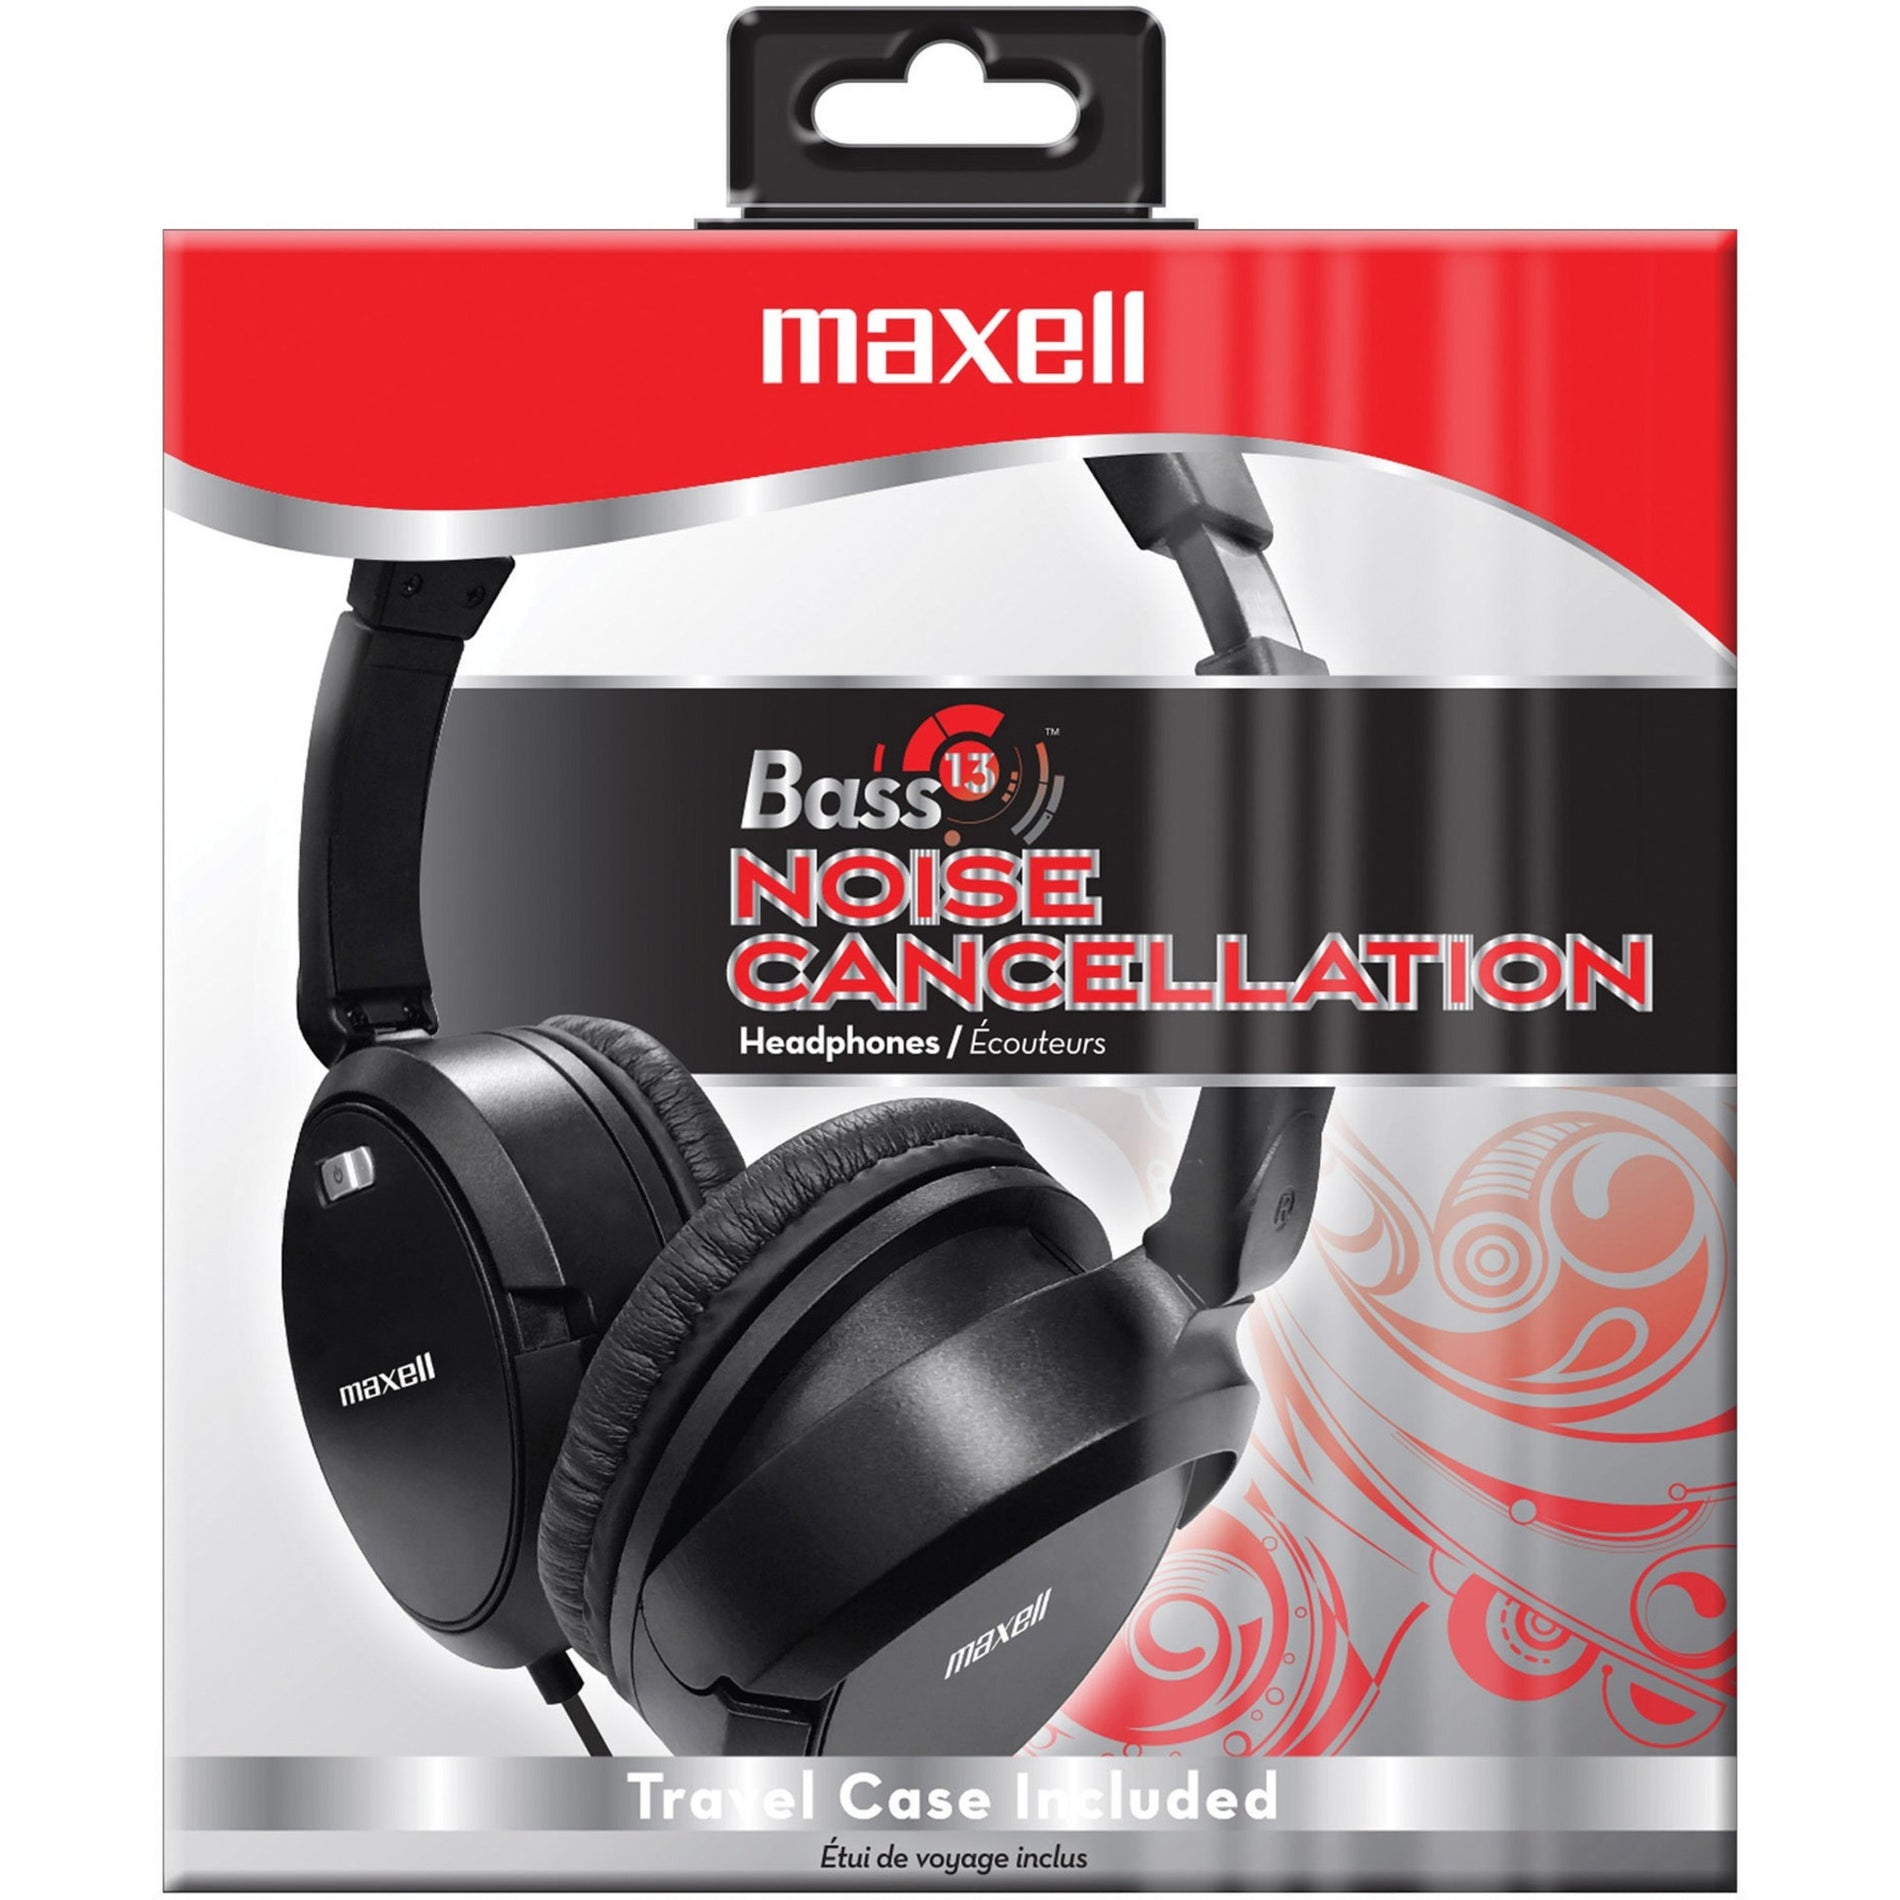 Maxell 190400 Noise Cancellation Headphones, Travel Pouch, Black/Gray